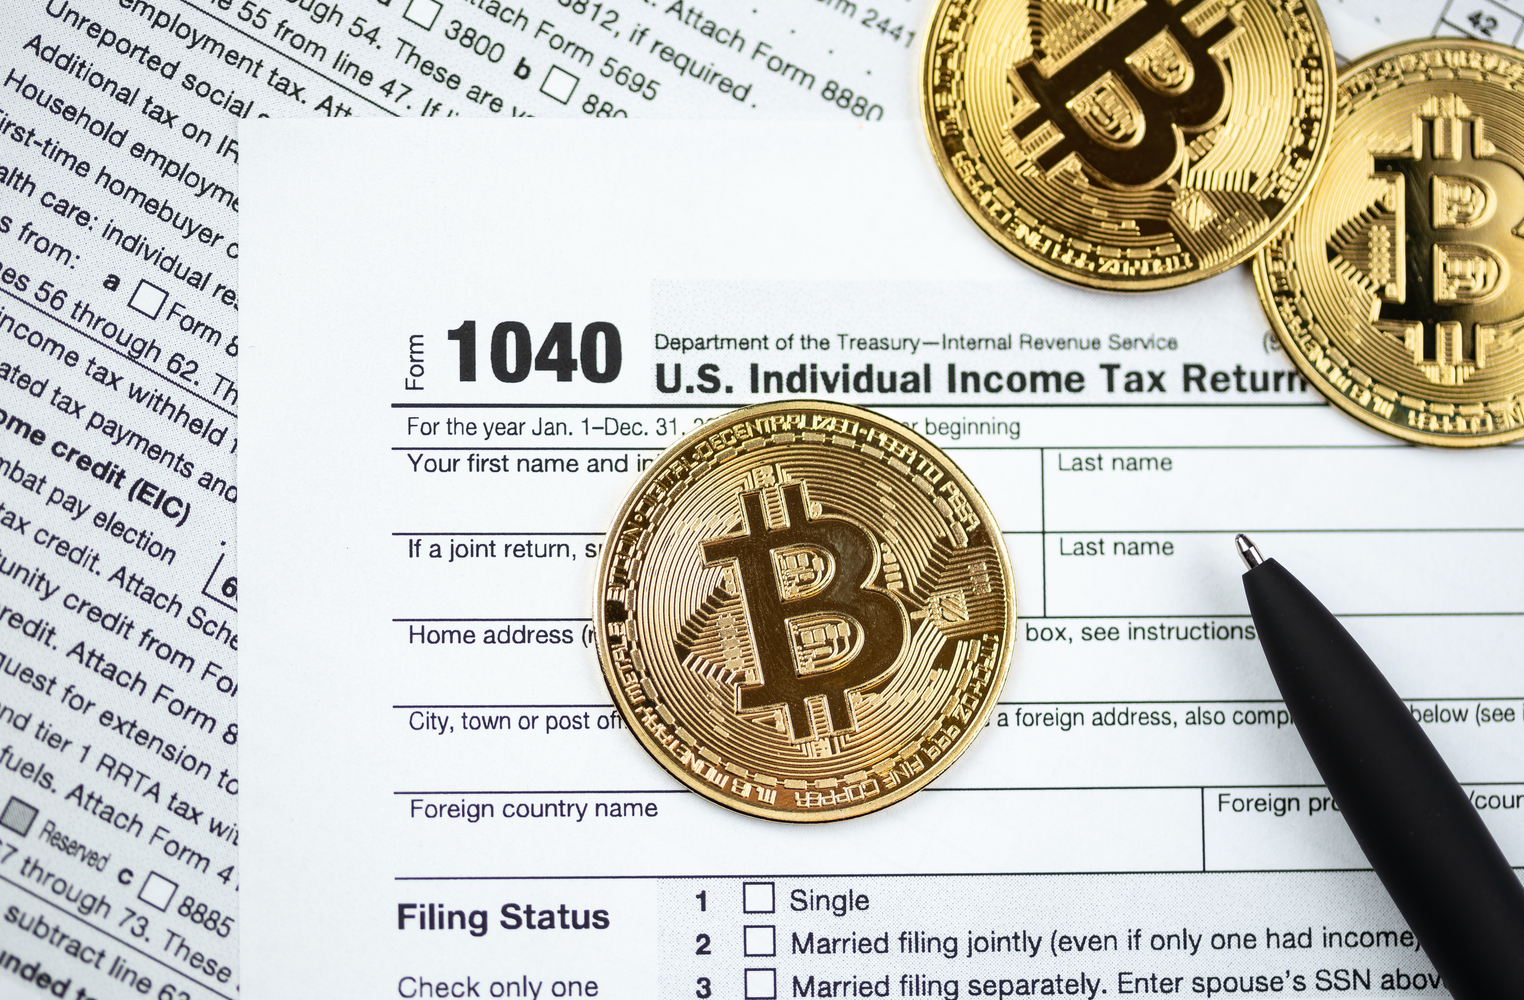 Tax Expert: IRS Crypto Question ‘Unconstitutional,’ Points, Flyer Miles Could Be Virtual Currency